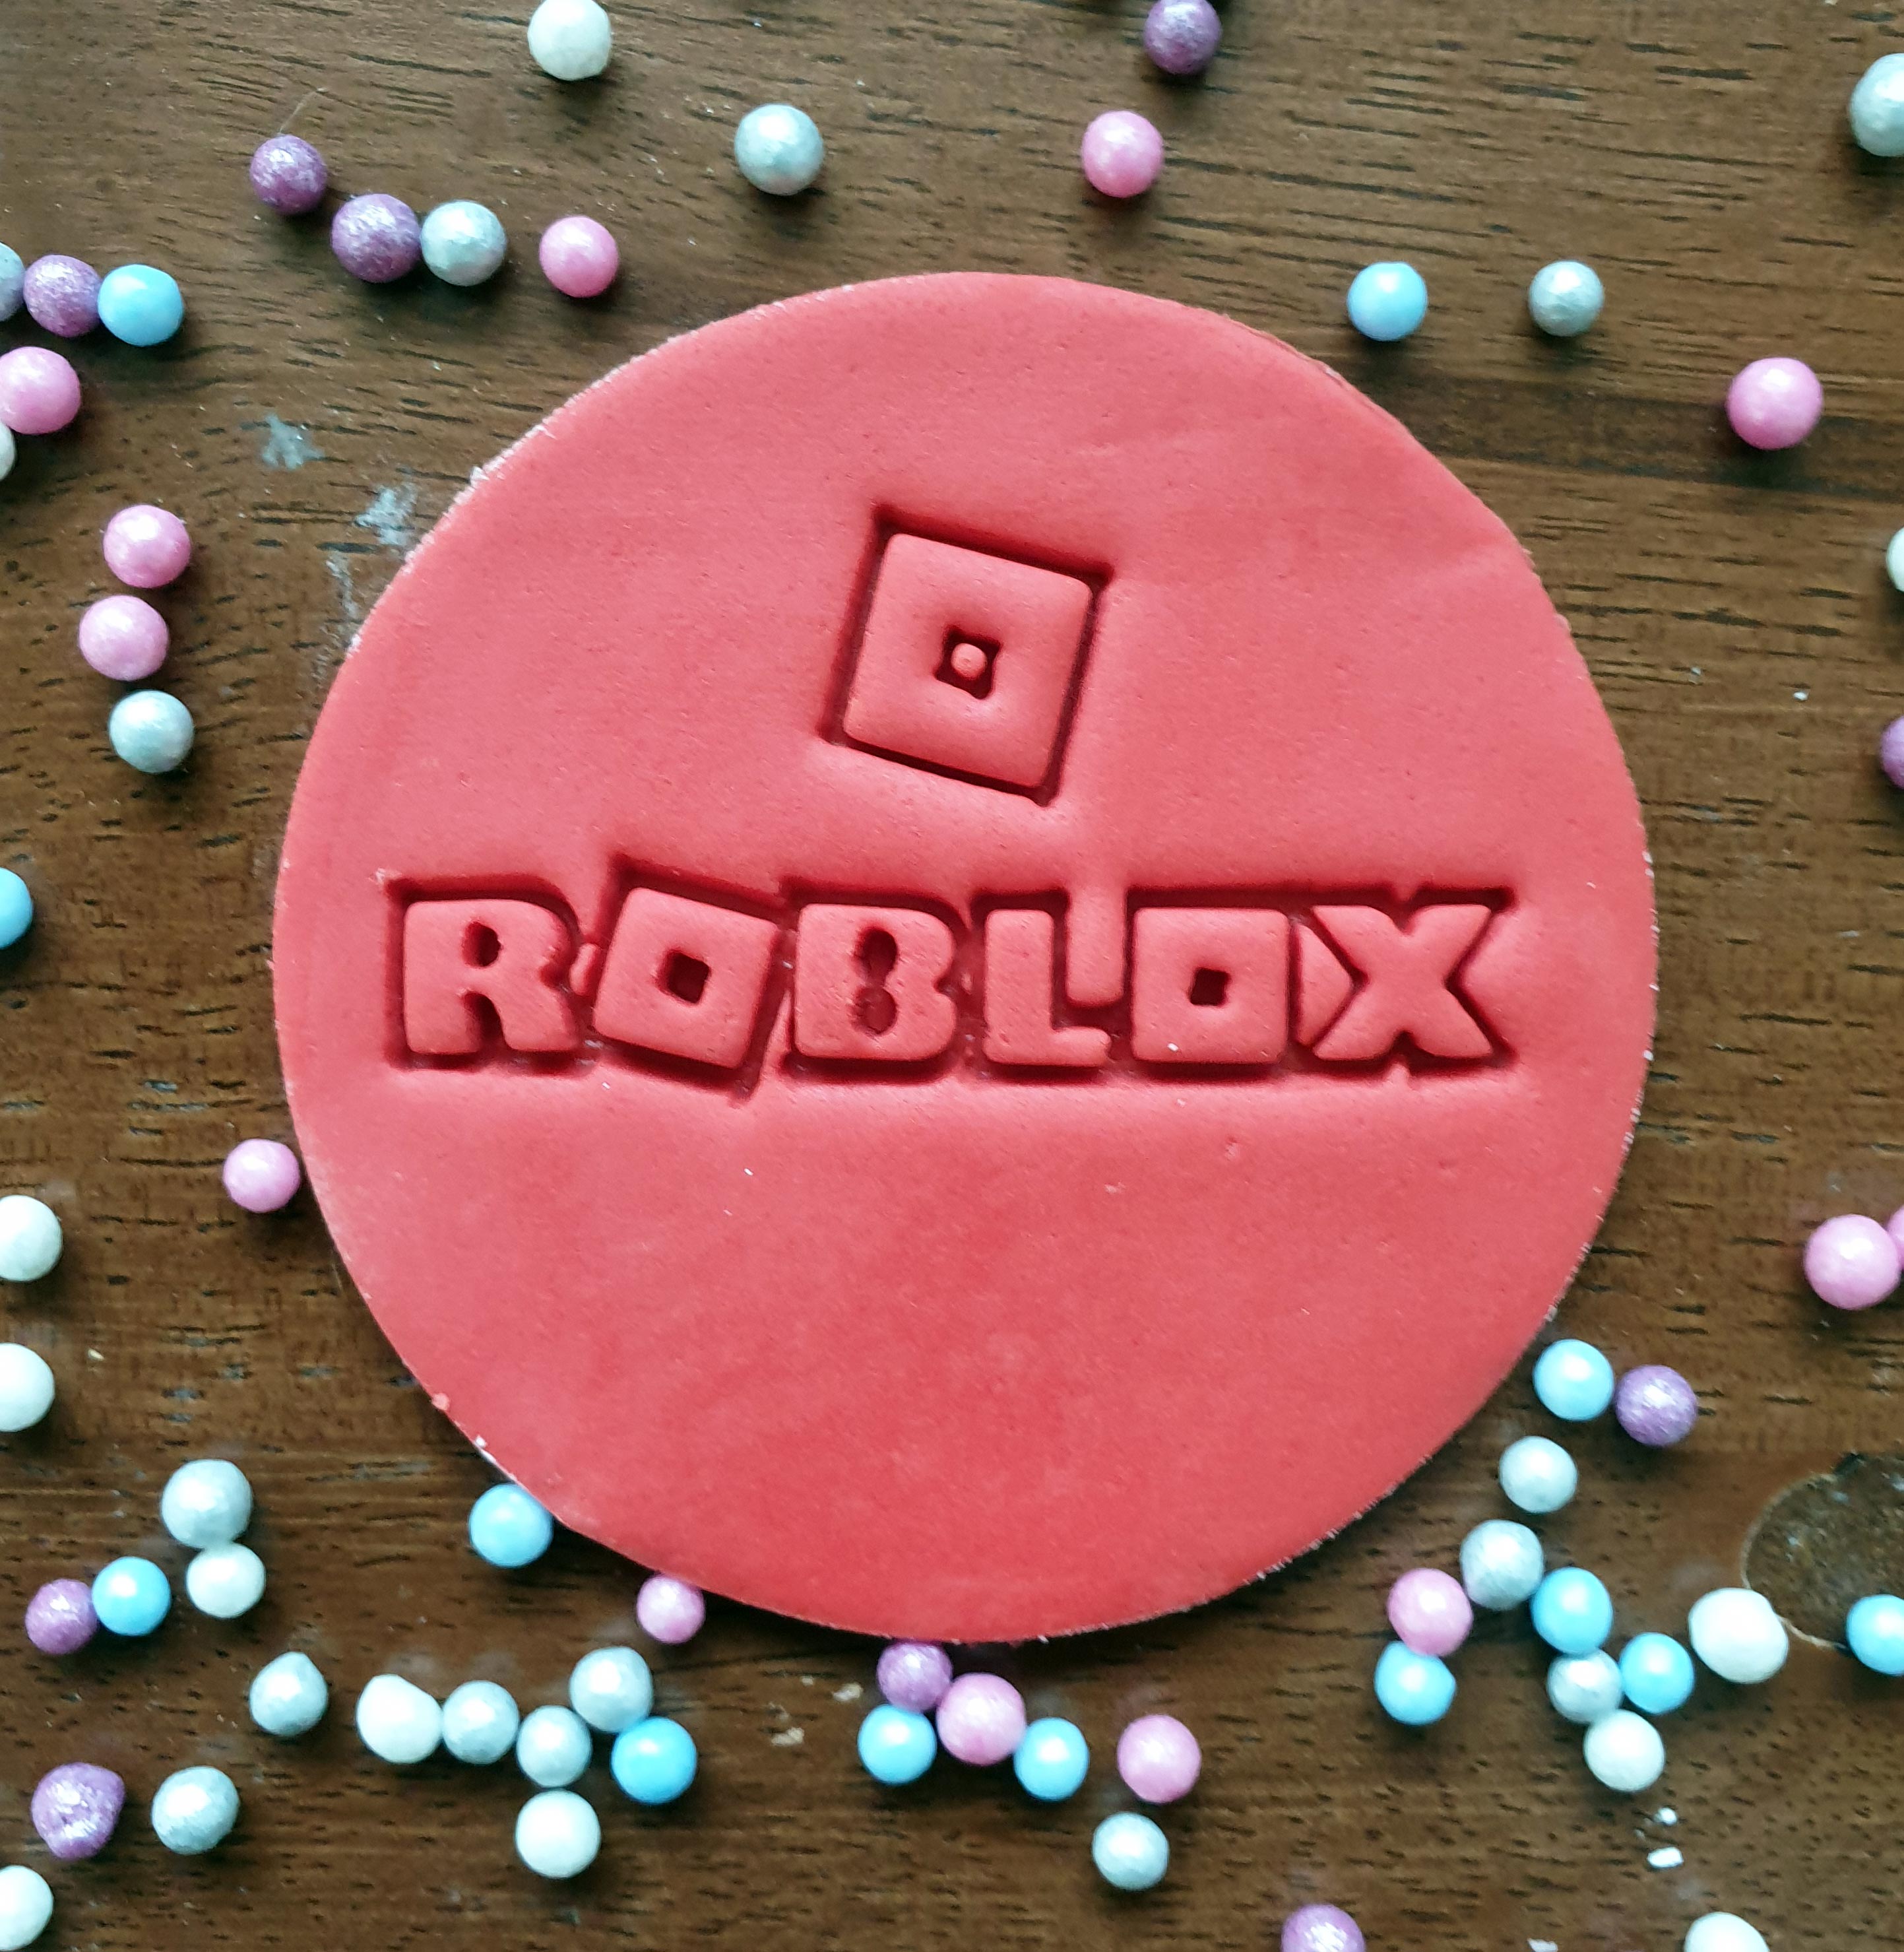 Bloxtober with roblox logo embroidery design